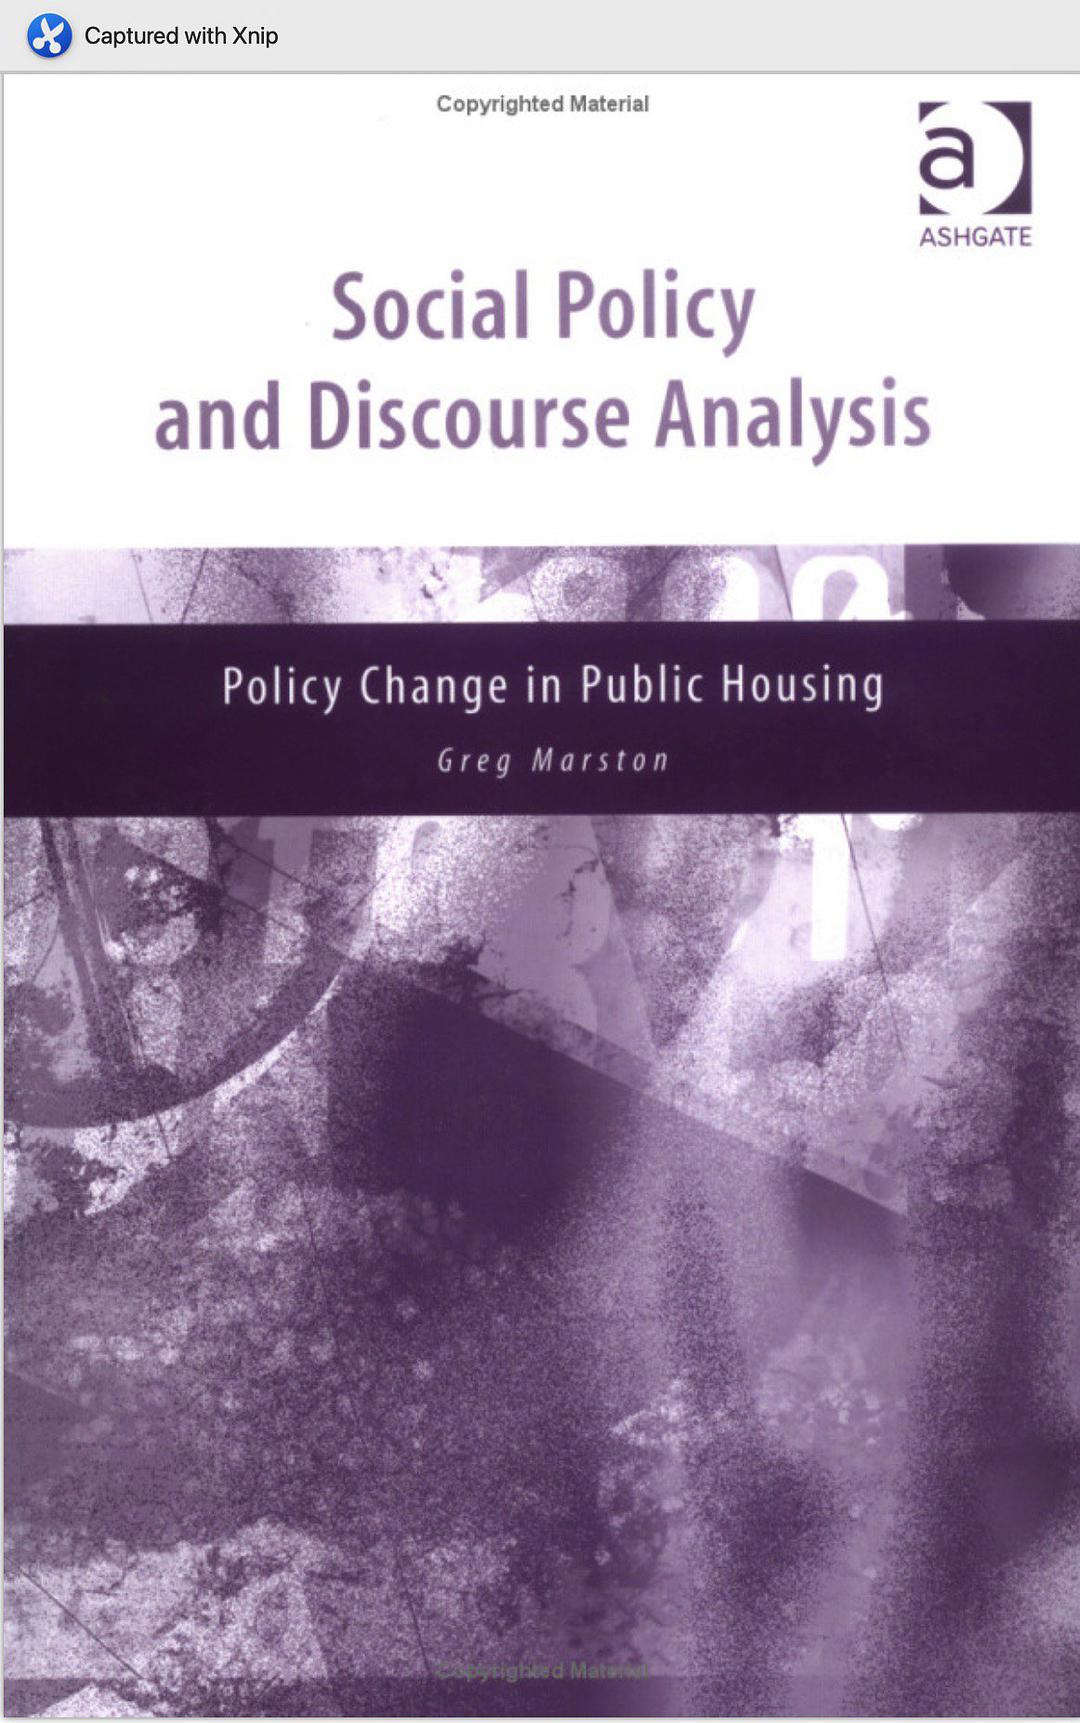 Social policy and discourse analysis policy change in public housing